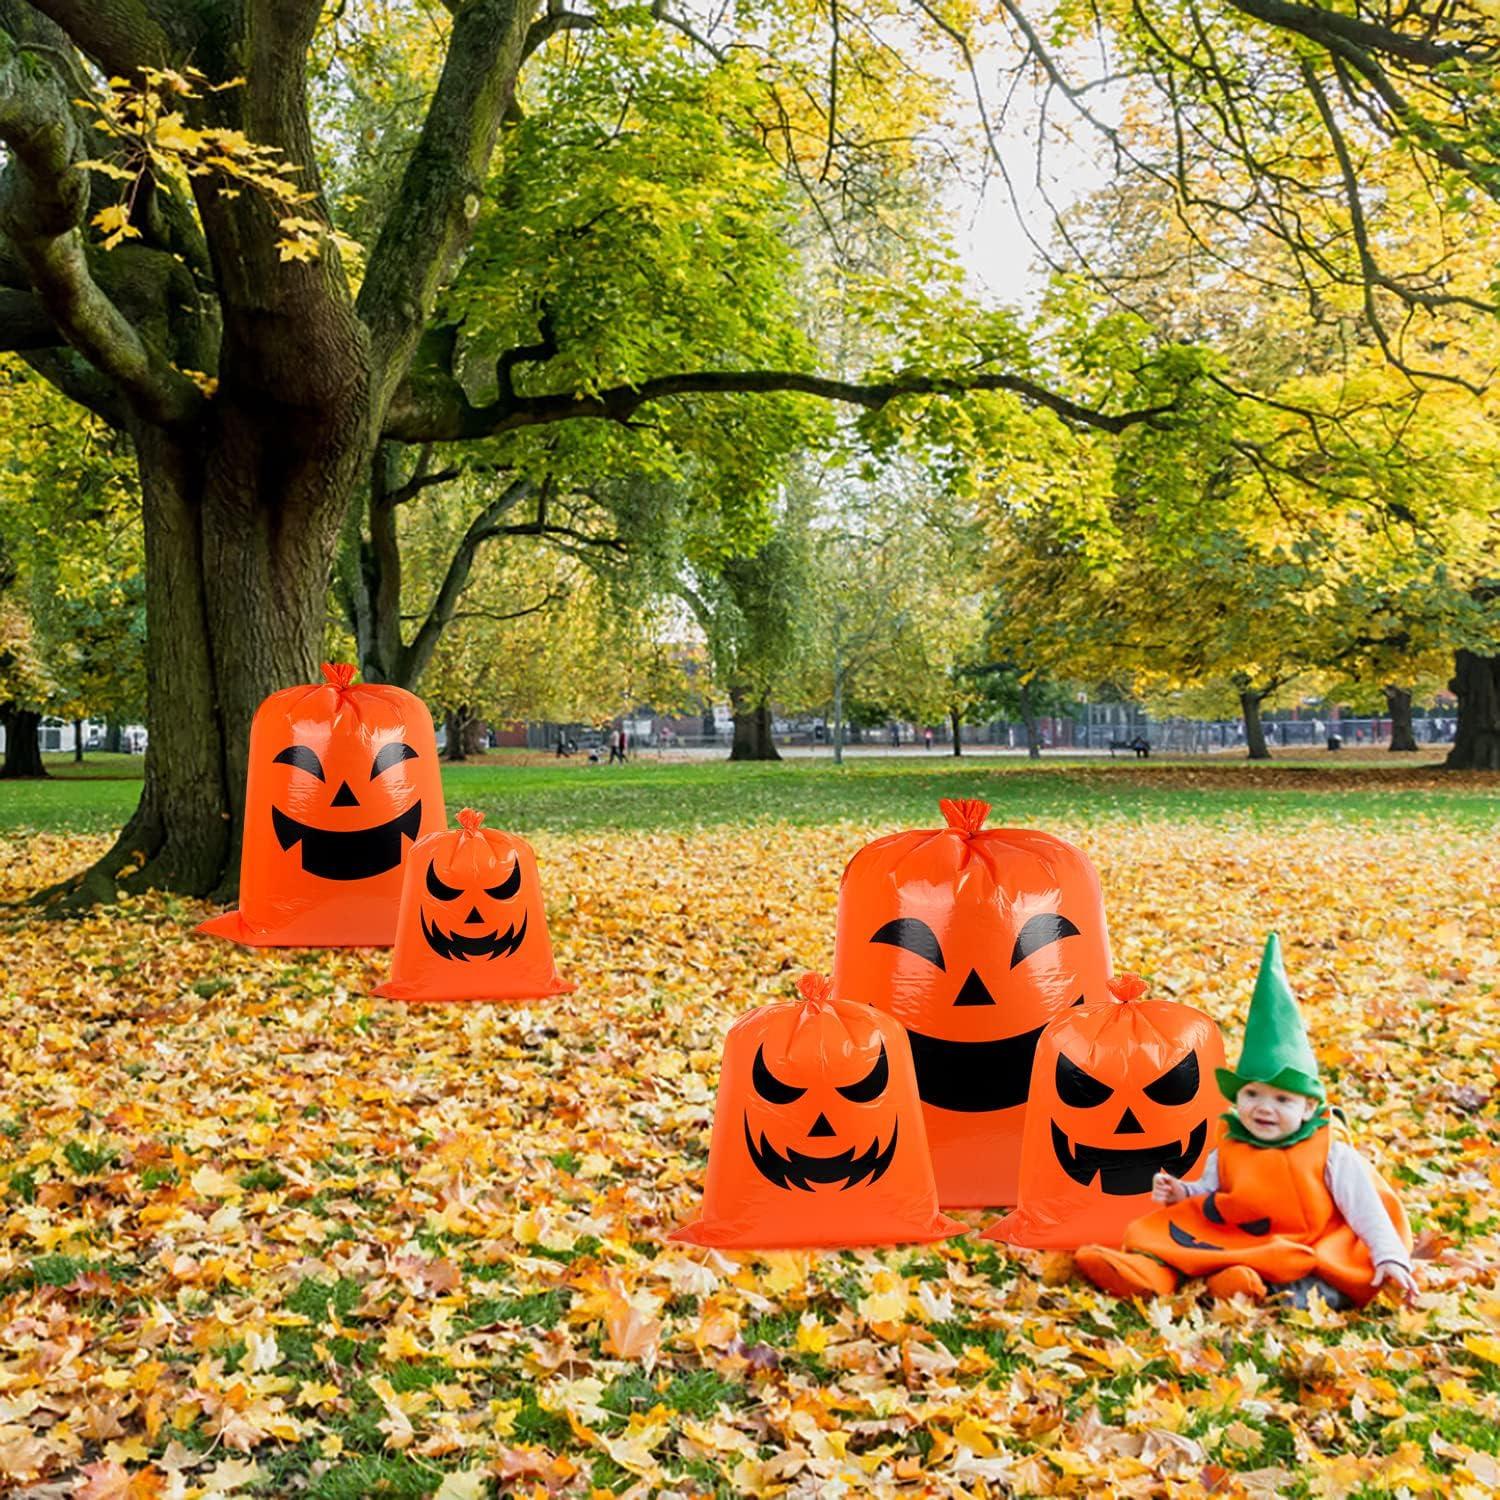 Pumpkin Leaf Bags Decorations - Jack O Lantern Outdoor Yard Fall Lawn and  Leaves Pumpkins Decorating Bag with Ties - 3 Sizes